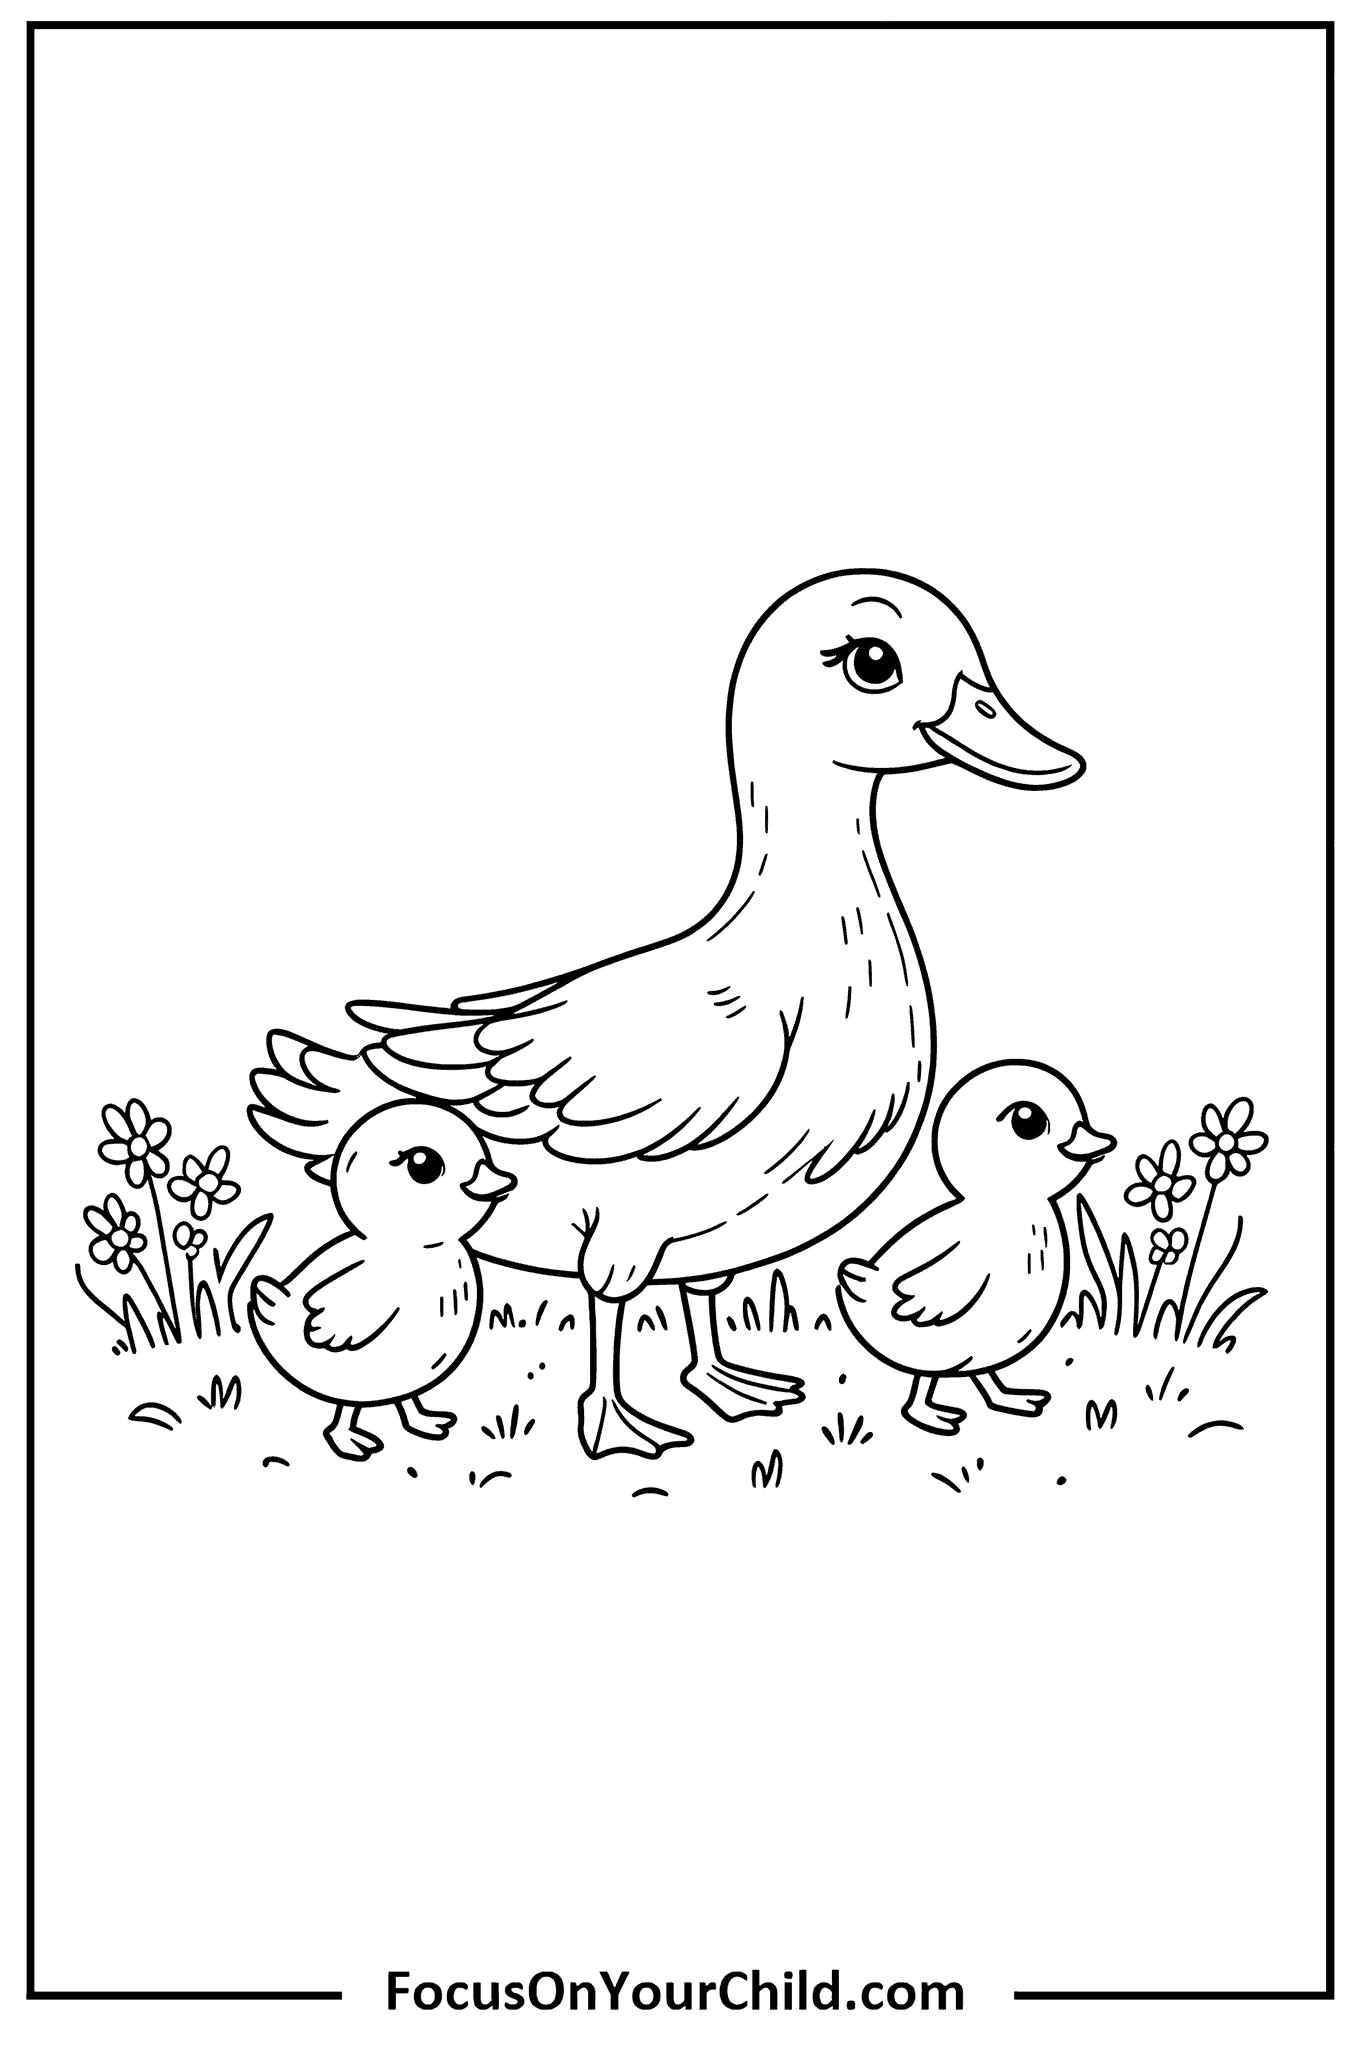 Charming duck family coloring page for childrens development and creativity.